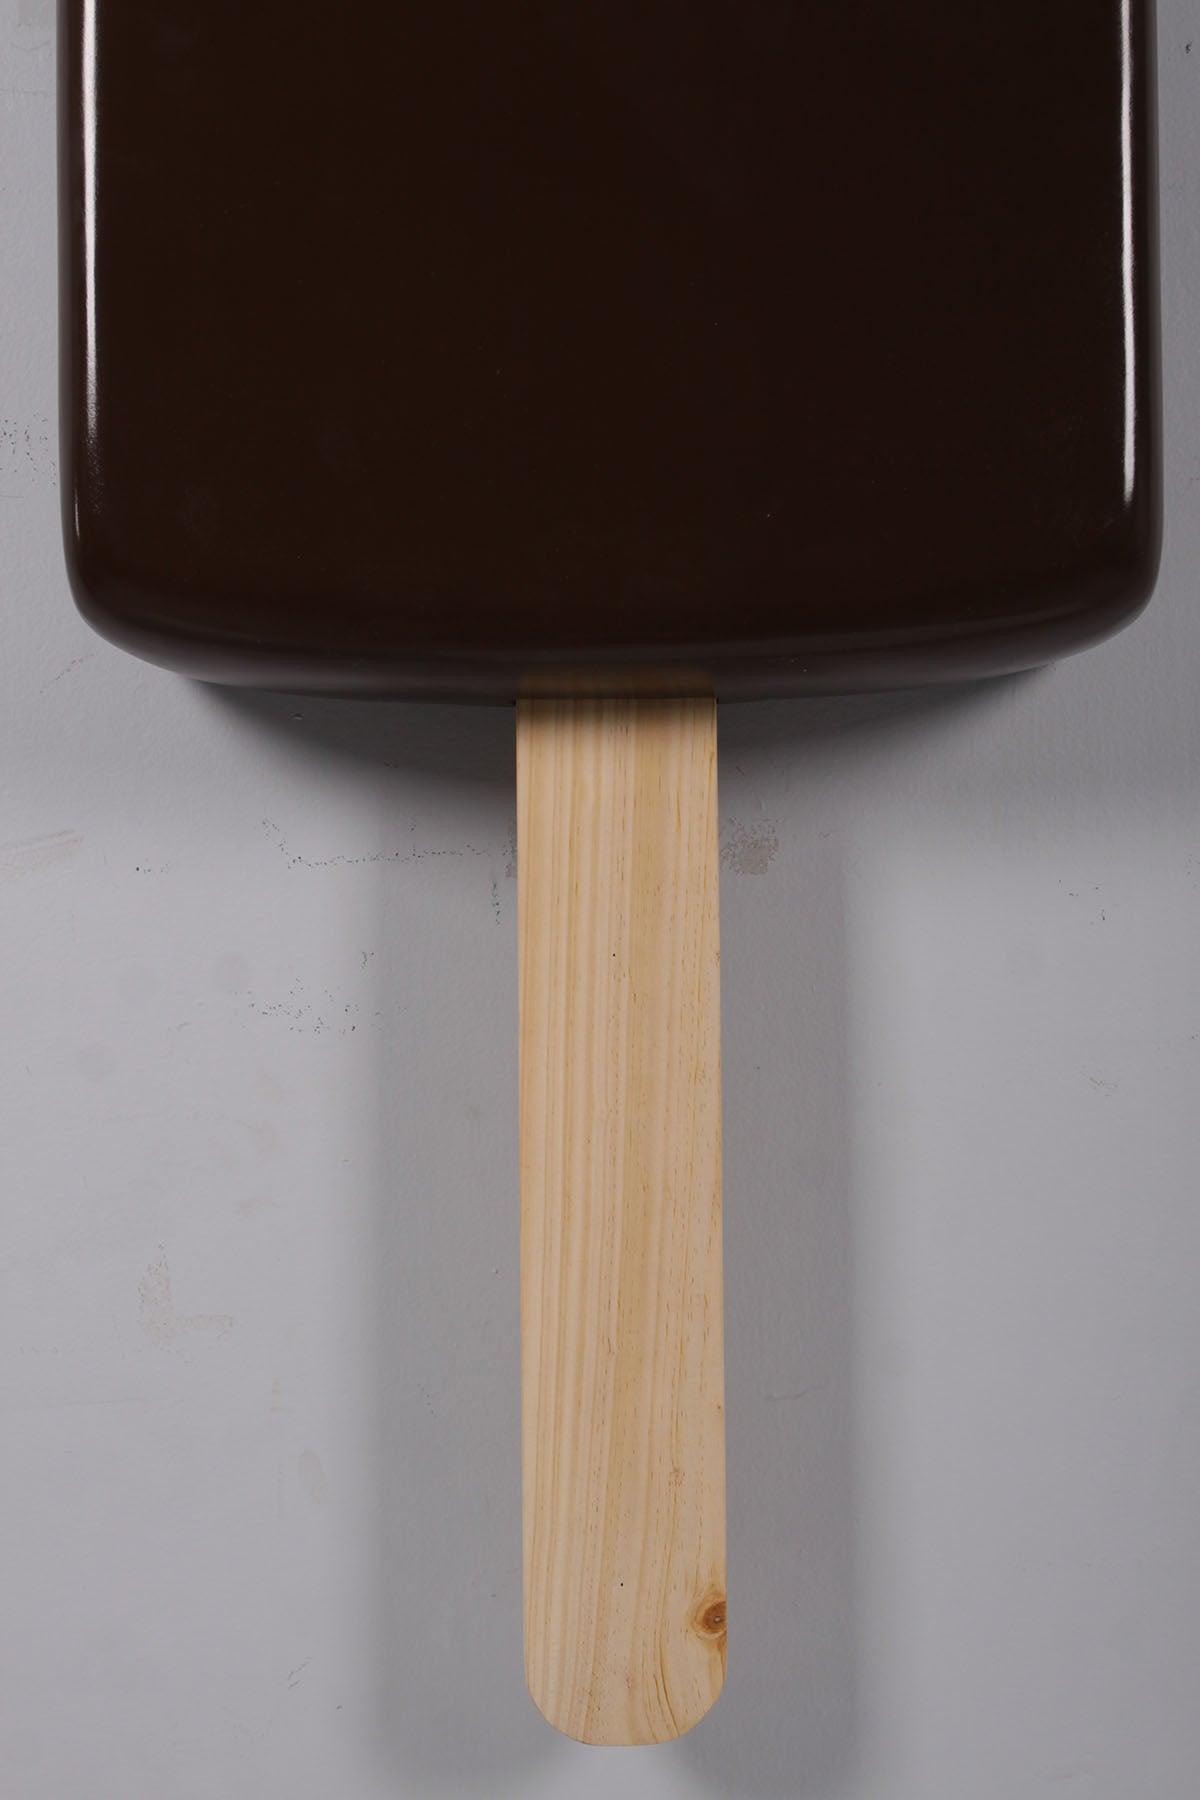 Small Hanging Chocolate Ice Cream Popsicle Statue - LM Treasures Prop Rentals 